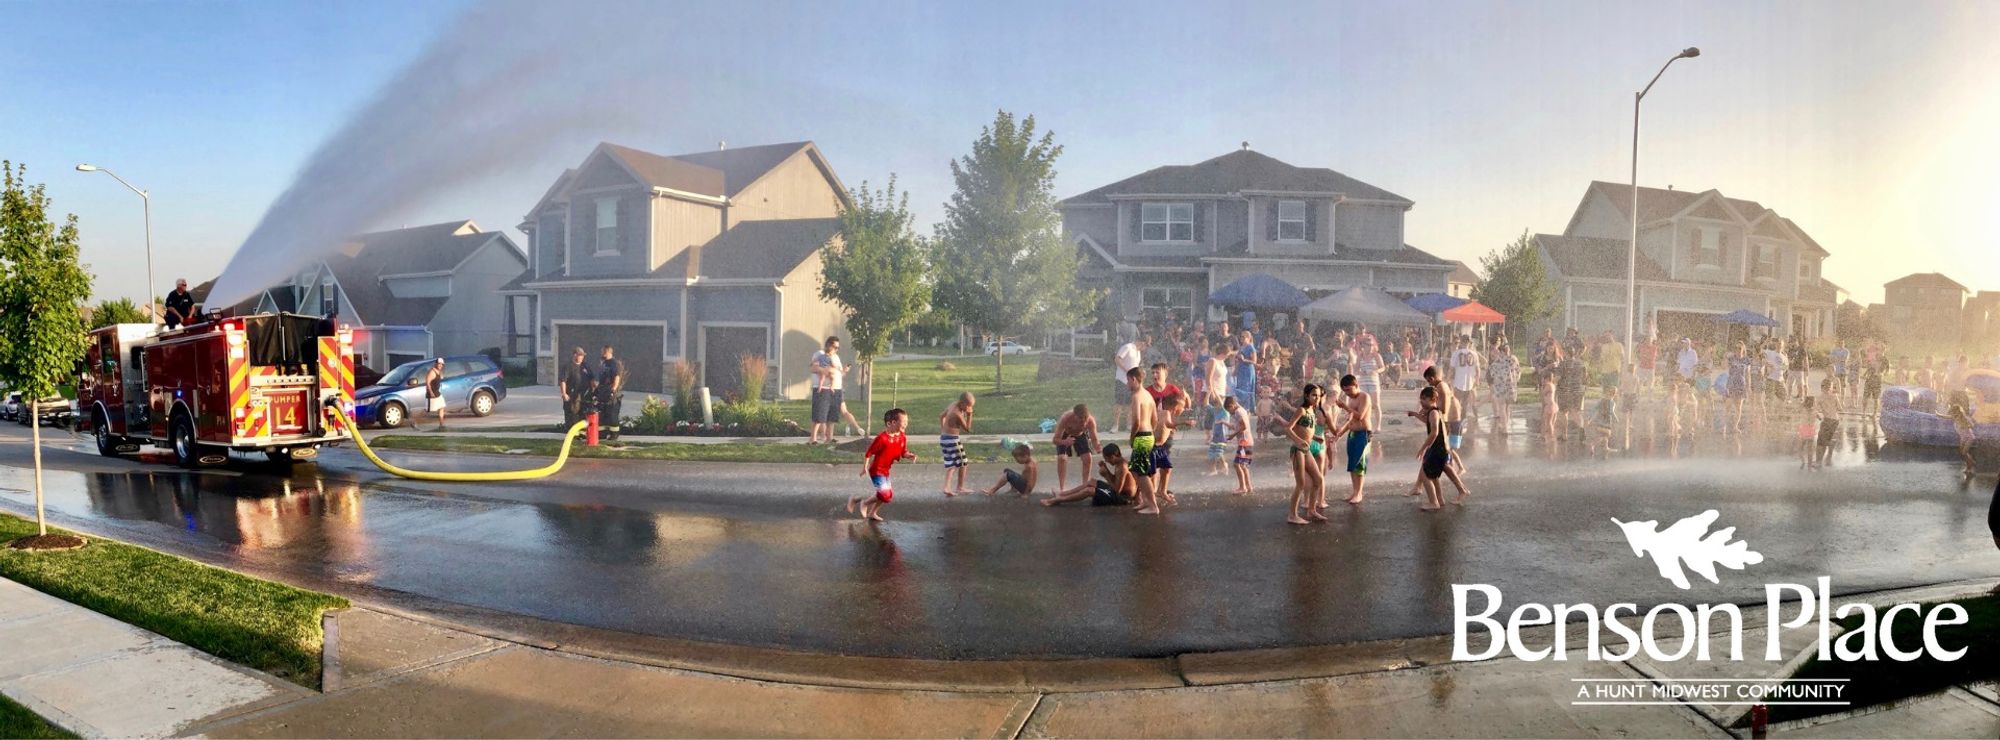 Benson Place neighborhood street with kids playing in water.